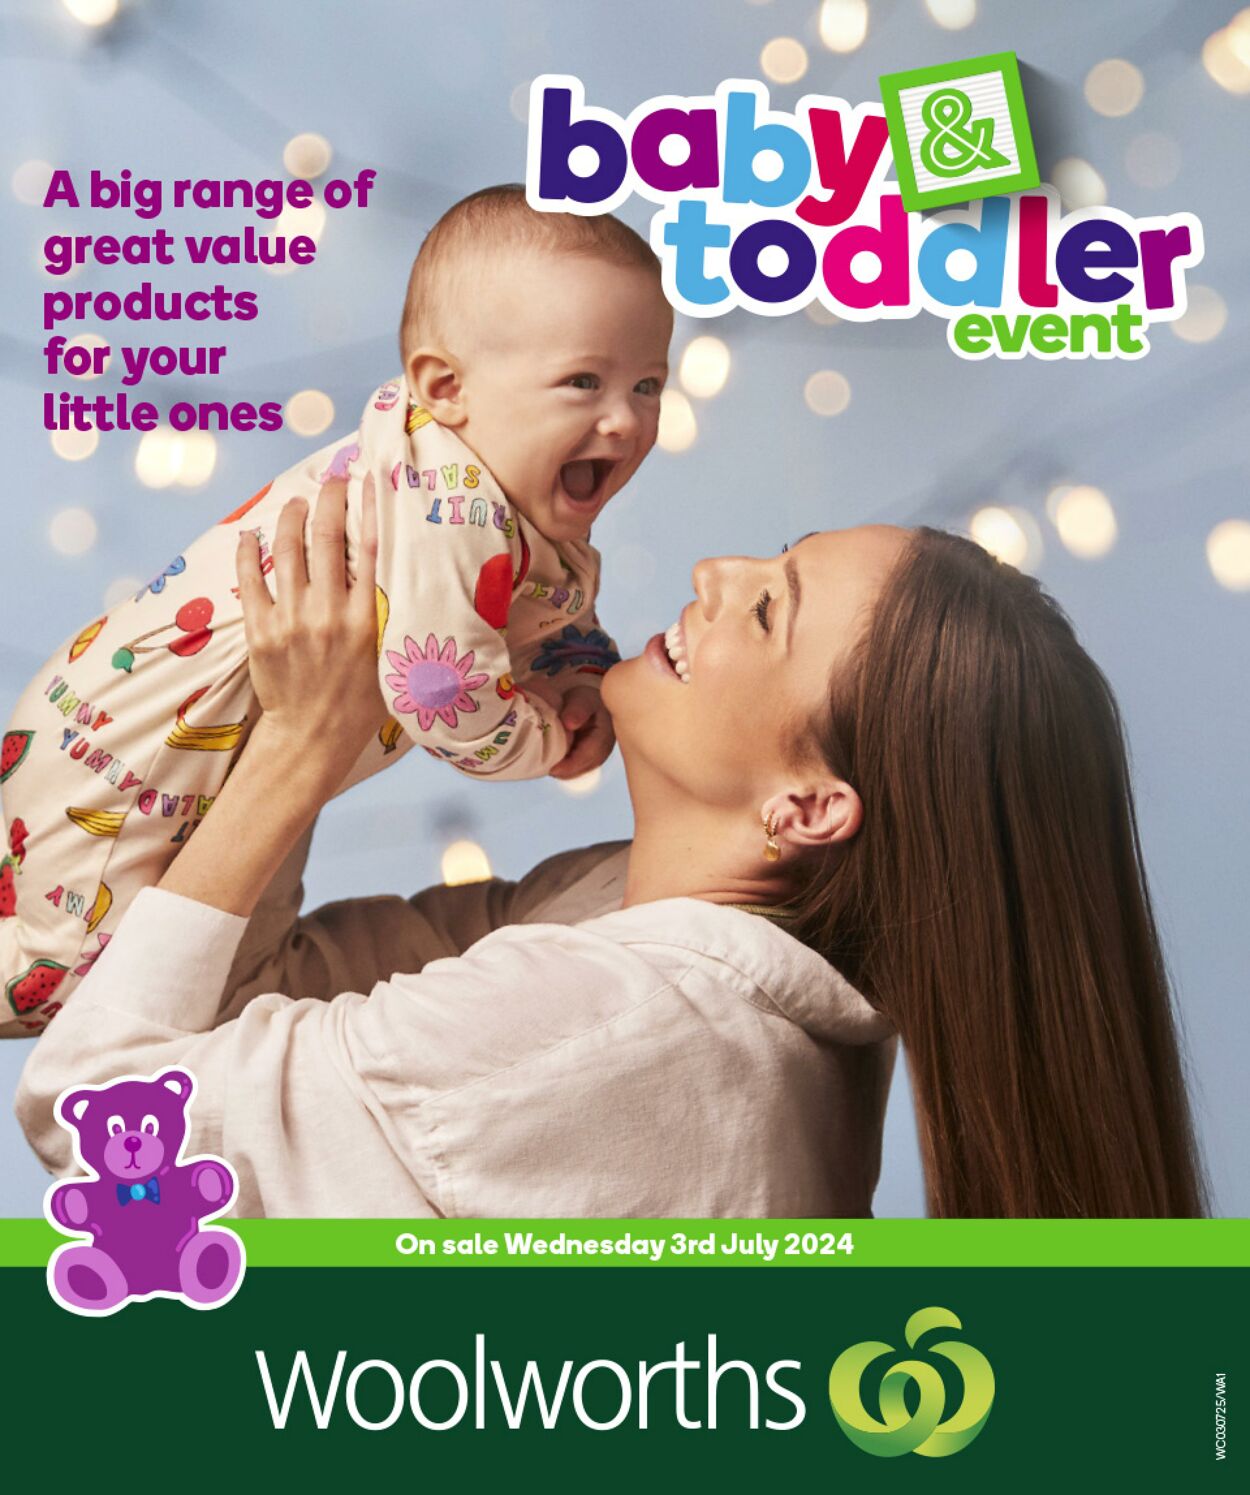 Catalogue Woolworths - Baby Toddler Event Catalogue WA 3 Jul, 2024 - 9 Jul, 2024